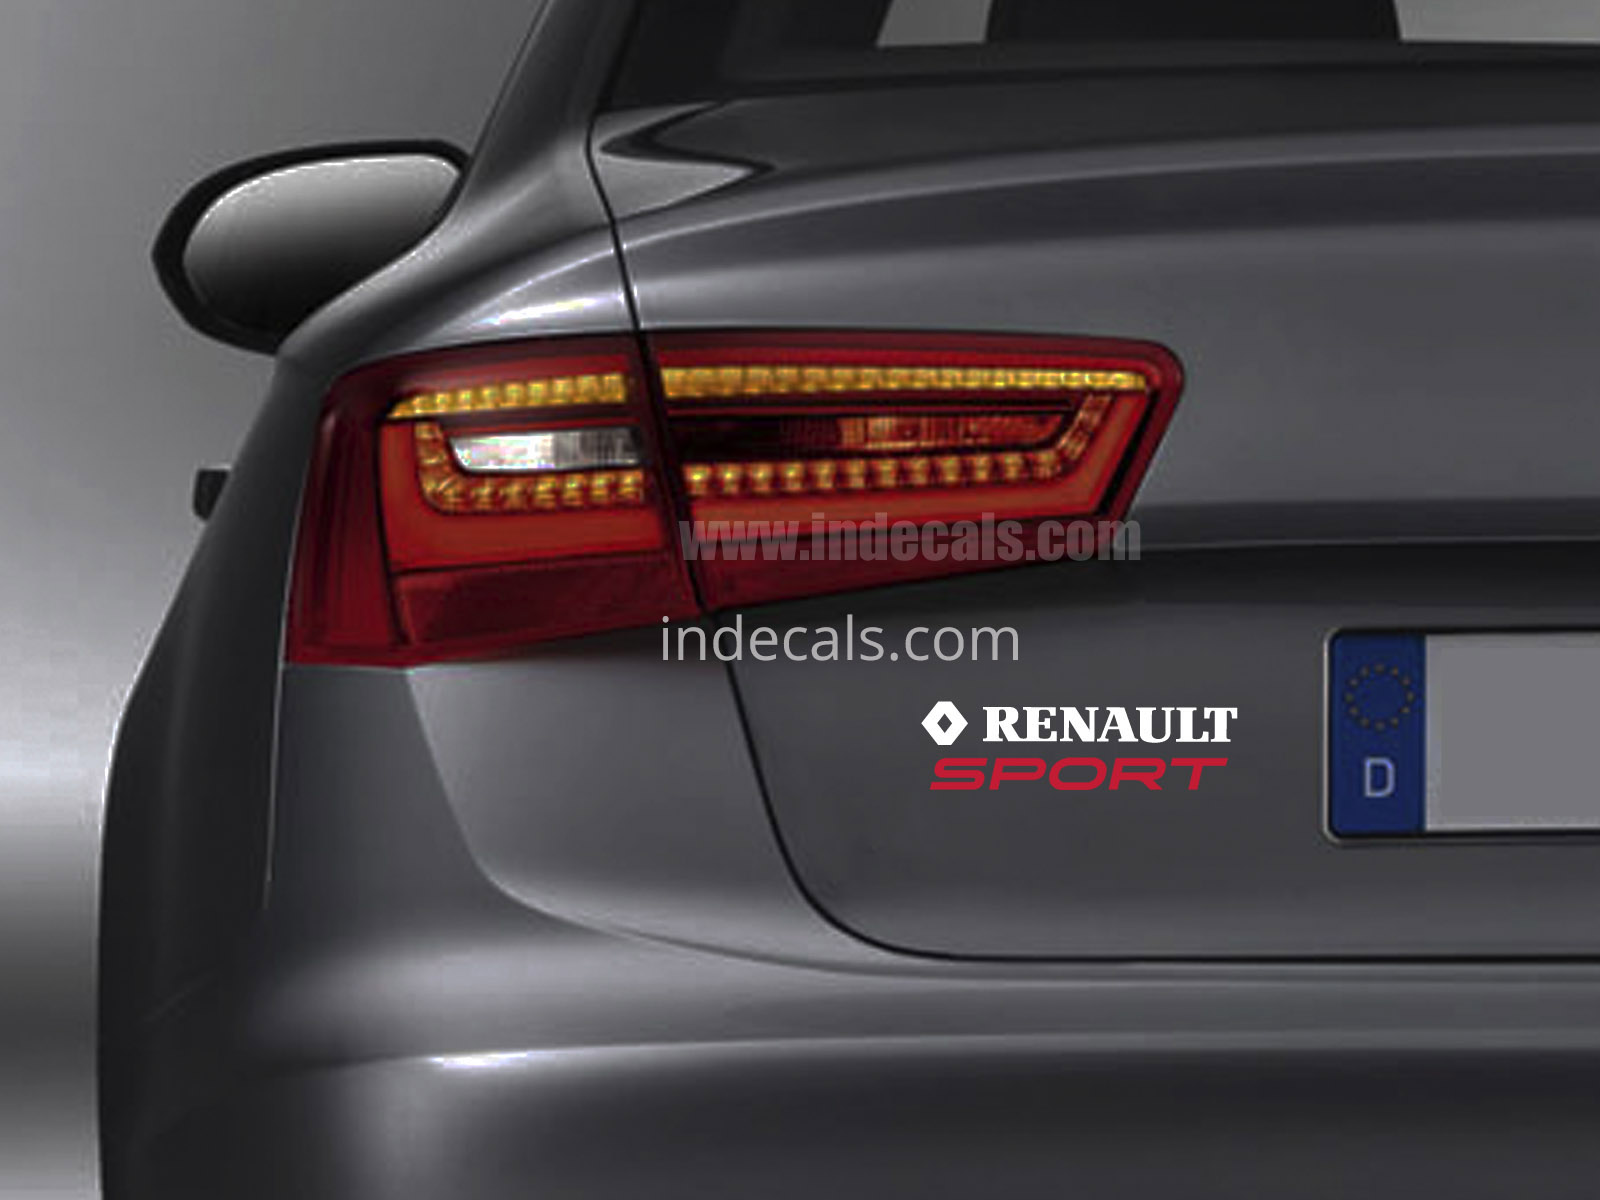 1 x Renault Sports Sticker for Trunk - White & Red